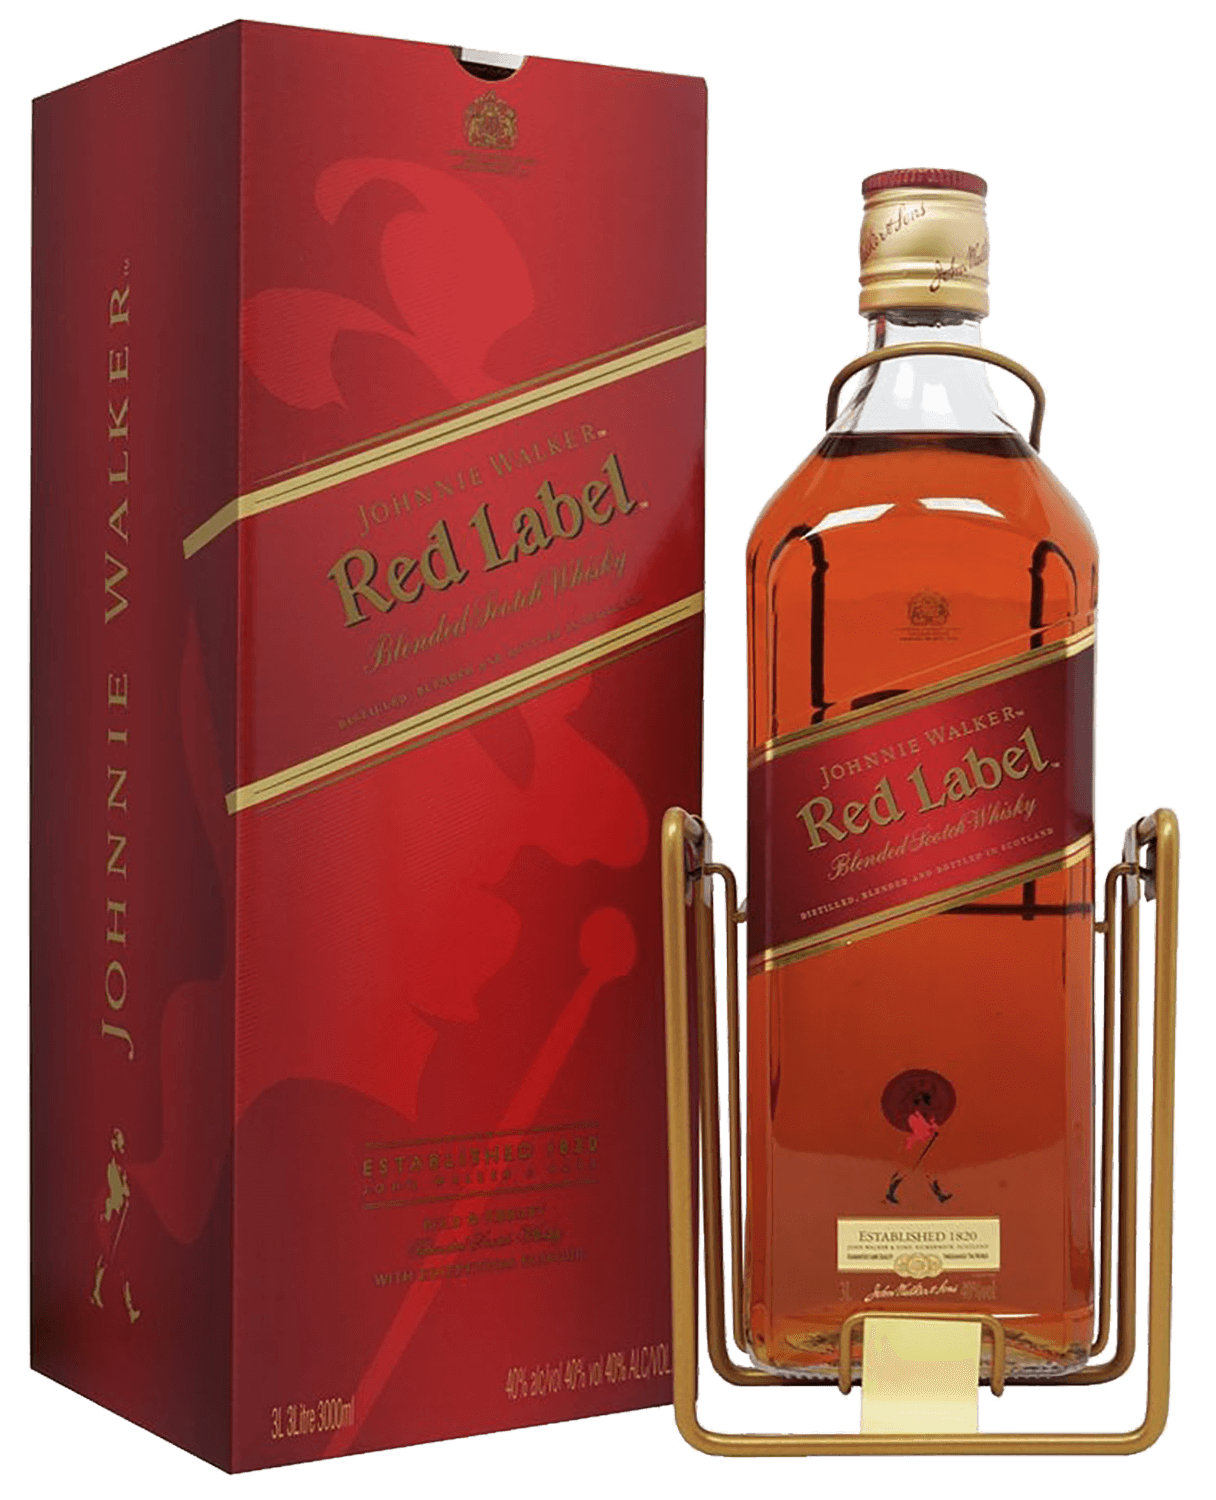 Johnnie Walker Red Label Blended Scotch Whisky (gift box) johnnie walker red label blended scotch whisky gift box